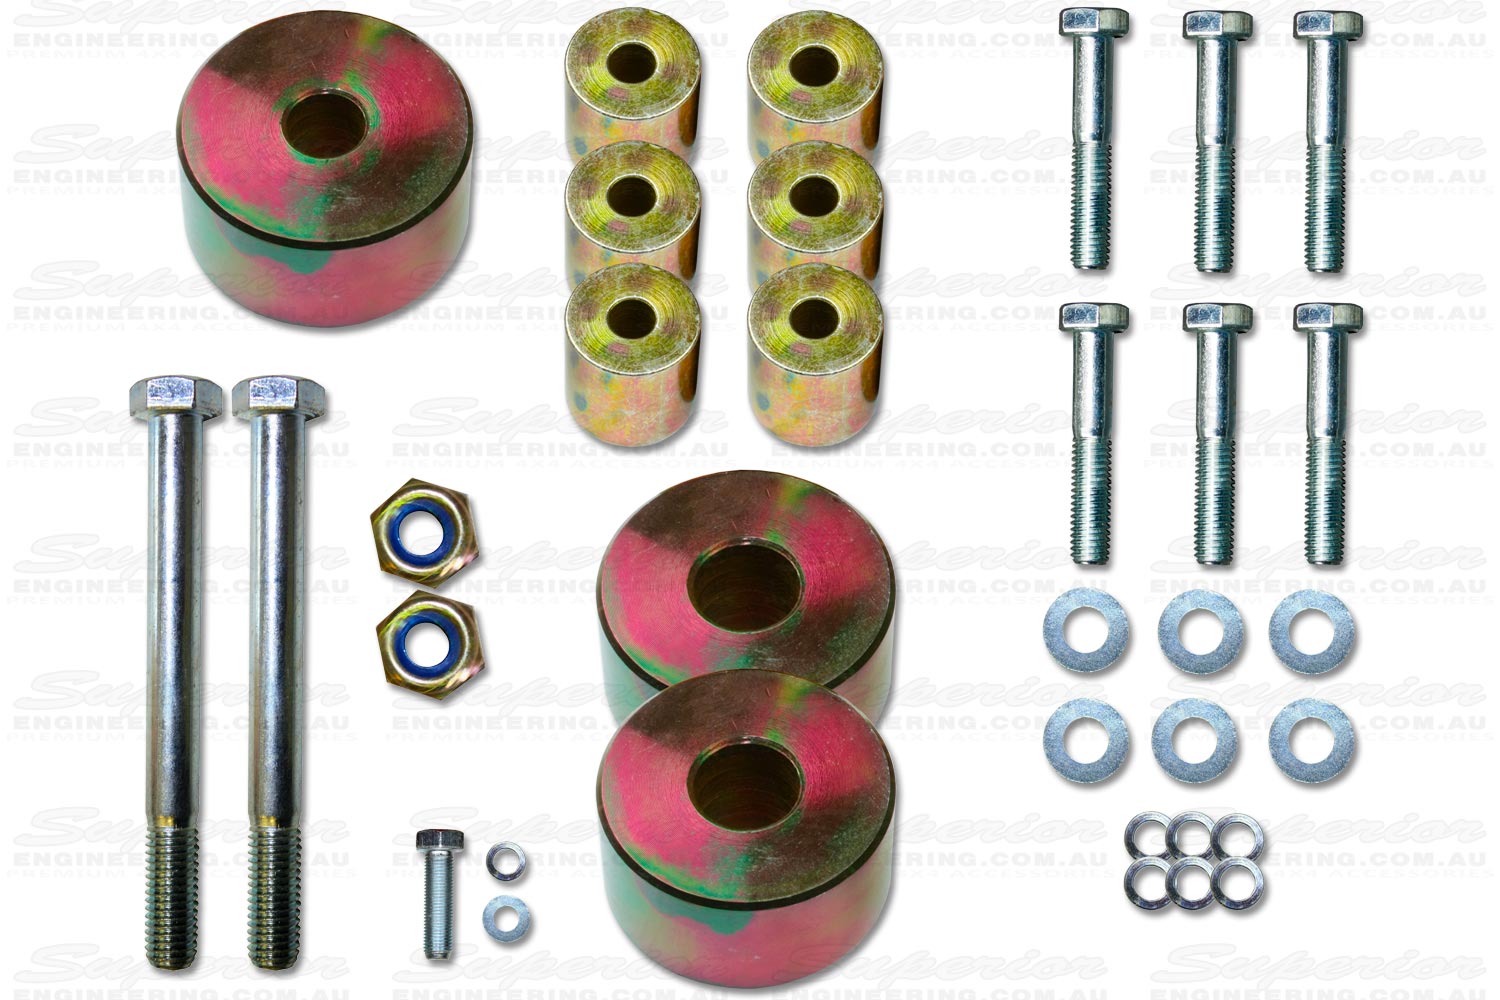 Complete Toyota Landcruiser 200 Series Superior Diff Drop kit with all the hardware